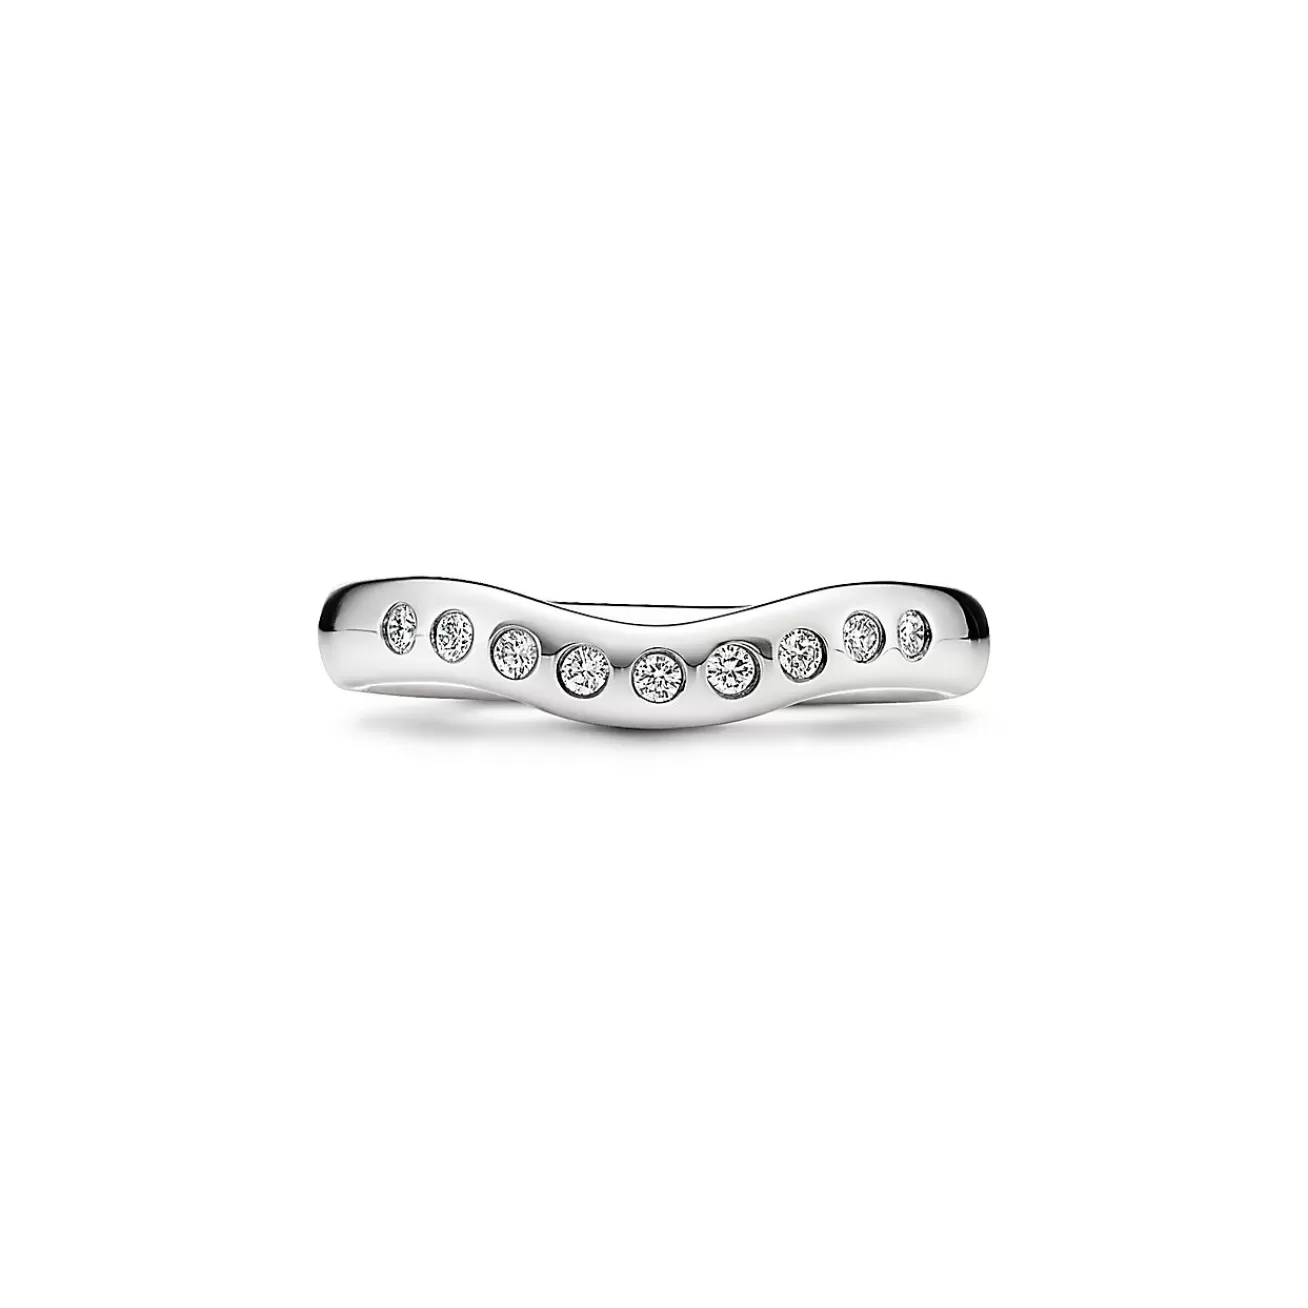 Tiffany & Co. Elsa Peretti® band ring with diamonds in platinum, wide. | ^ Rings | Platinum Jewelry